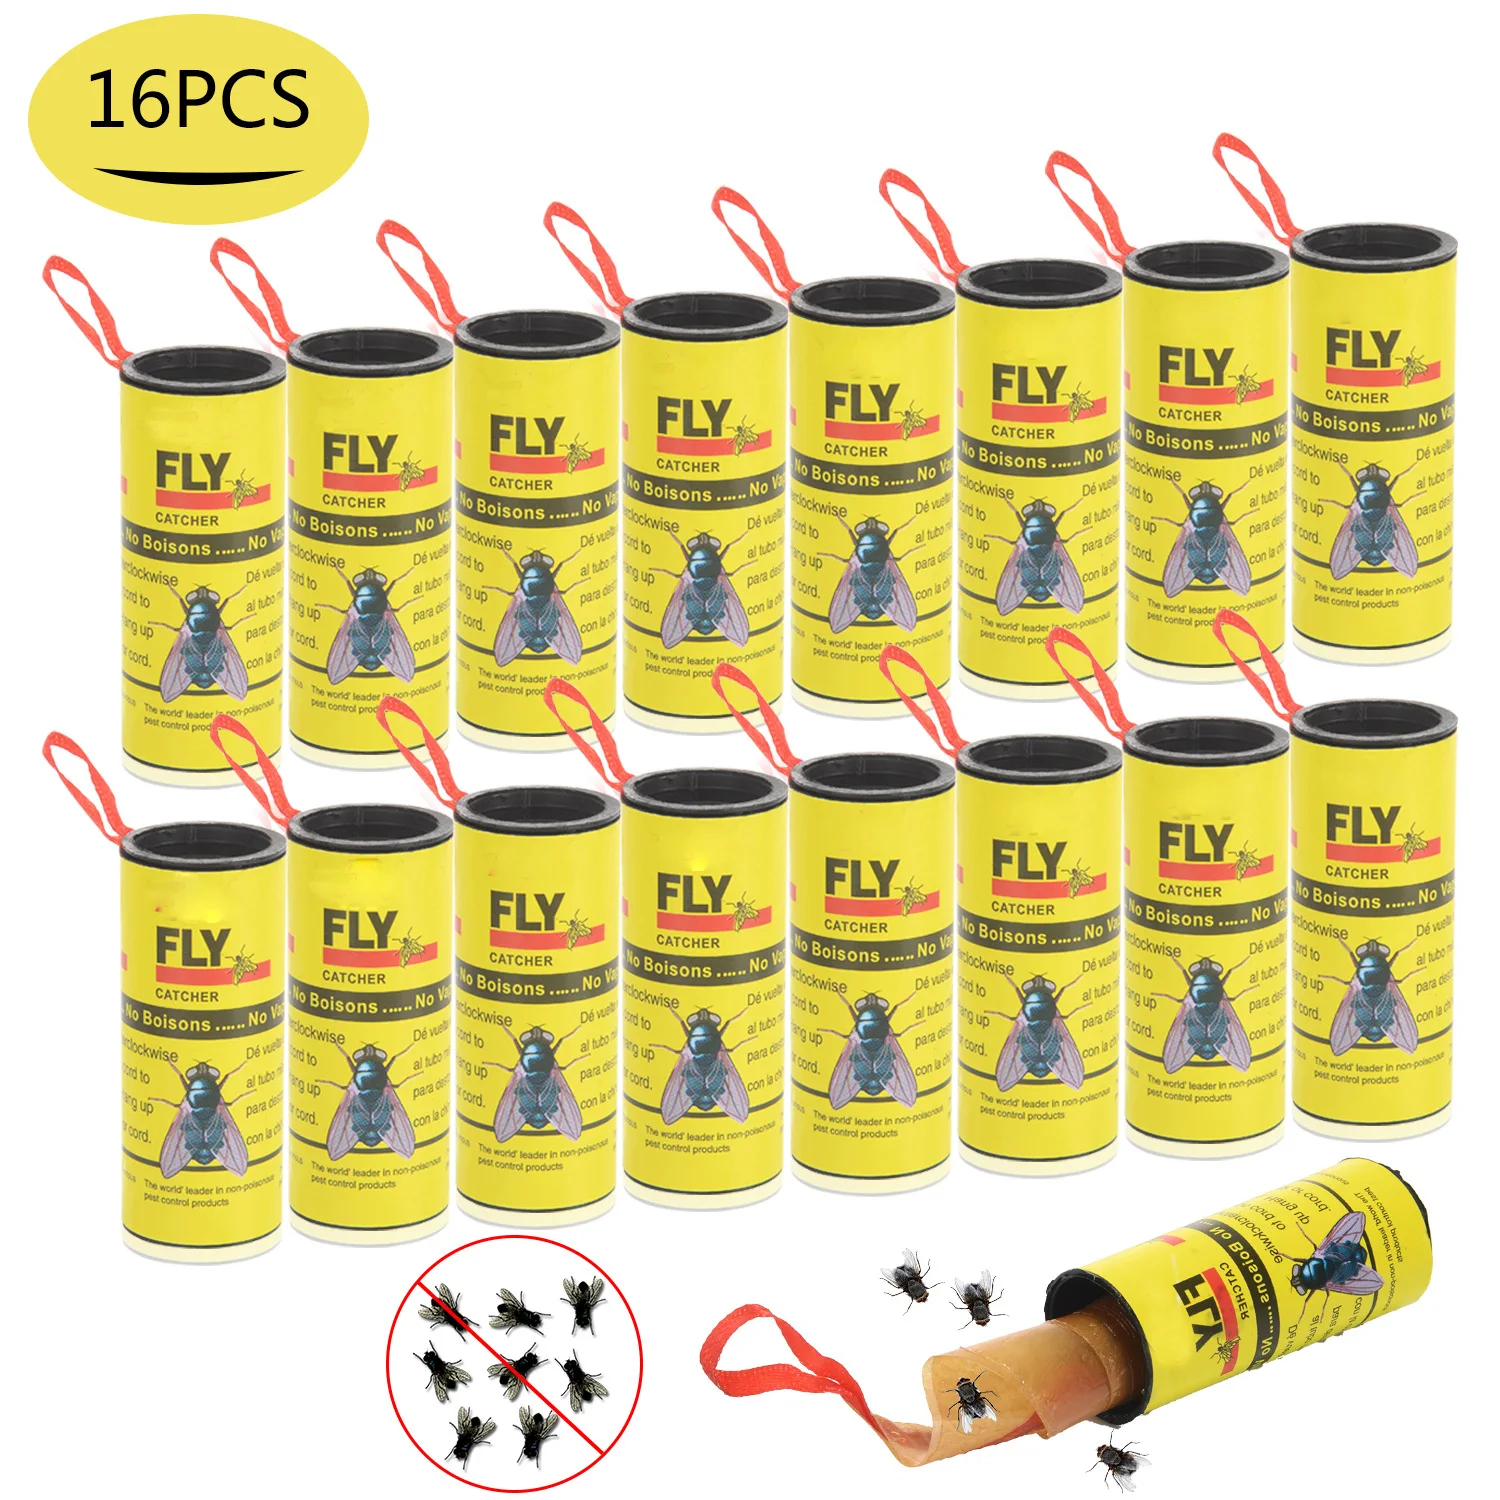 https://ae01.alicdn.com/kf/S70527dee99994719b05c26def039675fm/16PCS-Sticky-Fly-Ribbons-Roll-Strong-Glue-Double-Sided-Flies-Paper-Strips-Insect-Home-Glue-Fly.jpg